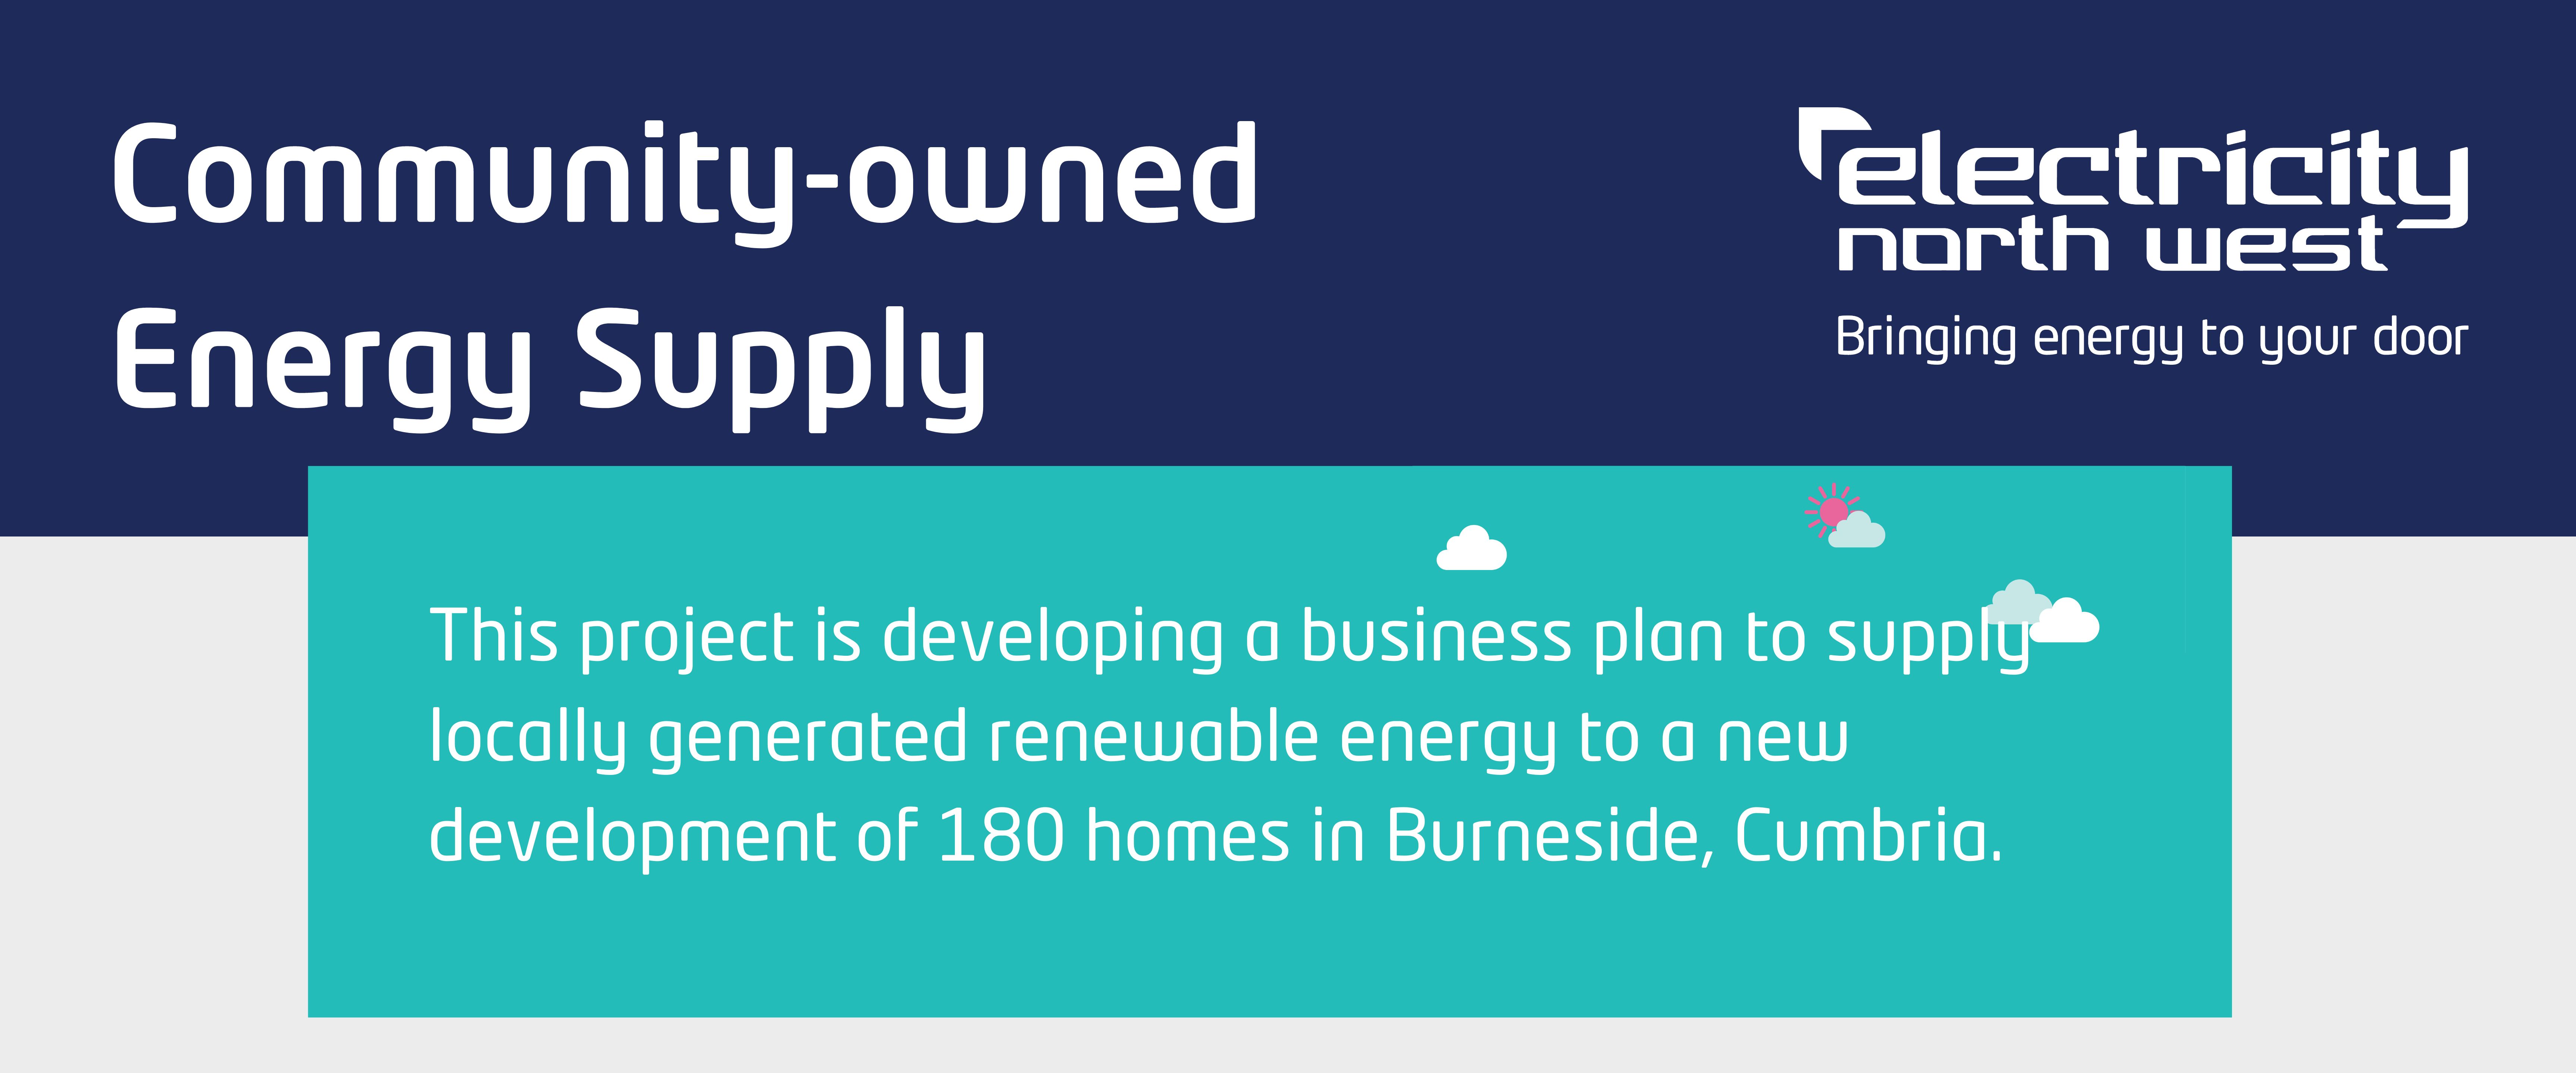 Community-owned Energy Supply, This project is developing a business plan to supply locally generated renewable energy to a new development of 180 homes in Burneside, Cumbria.